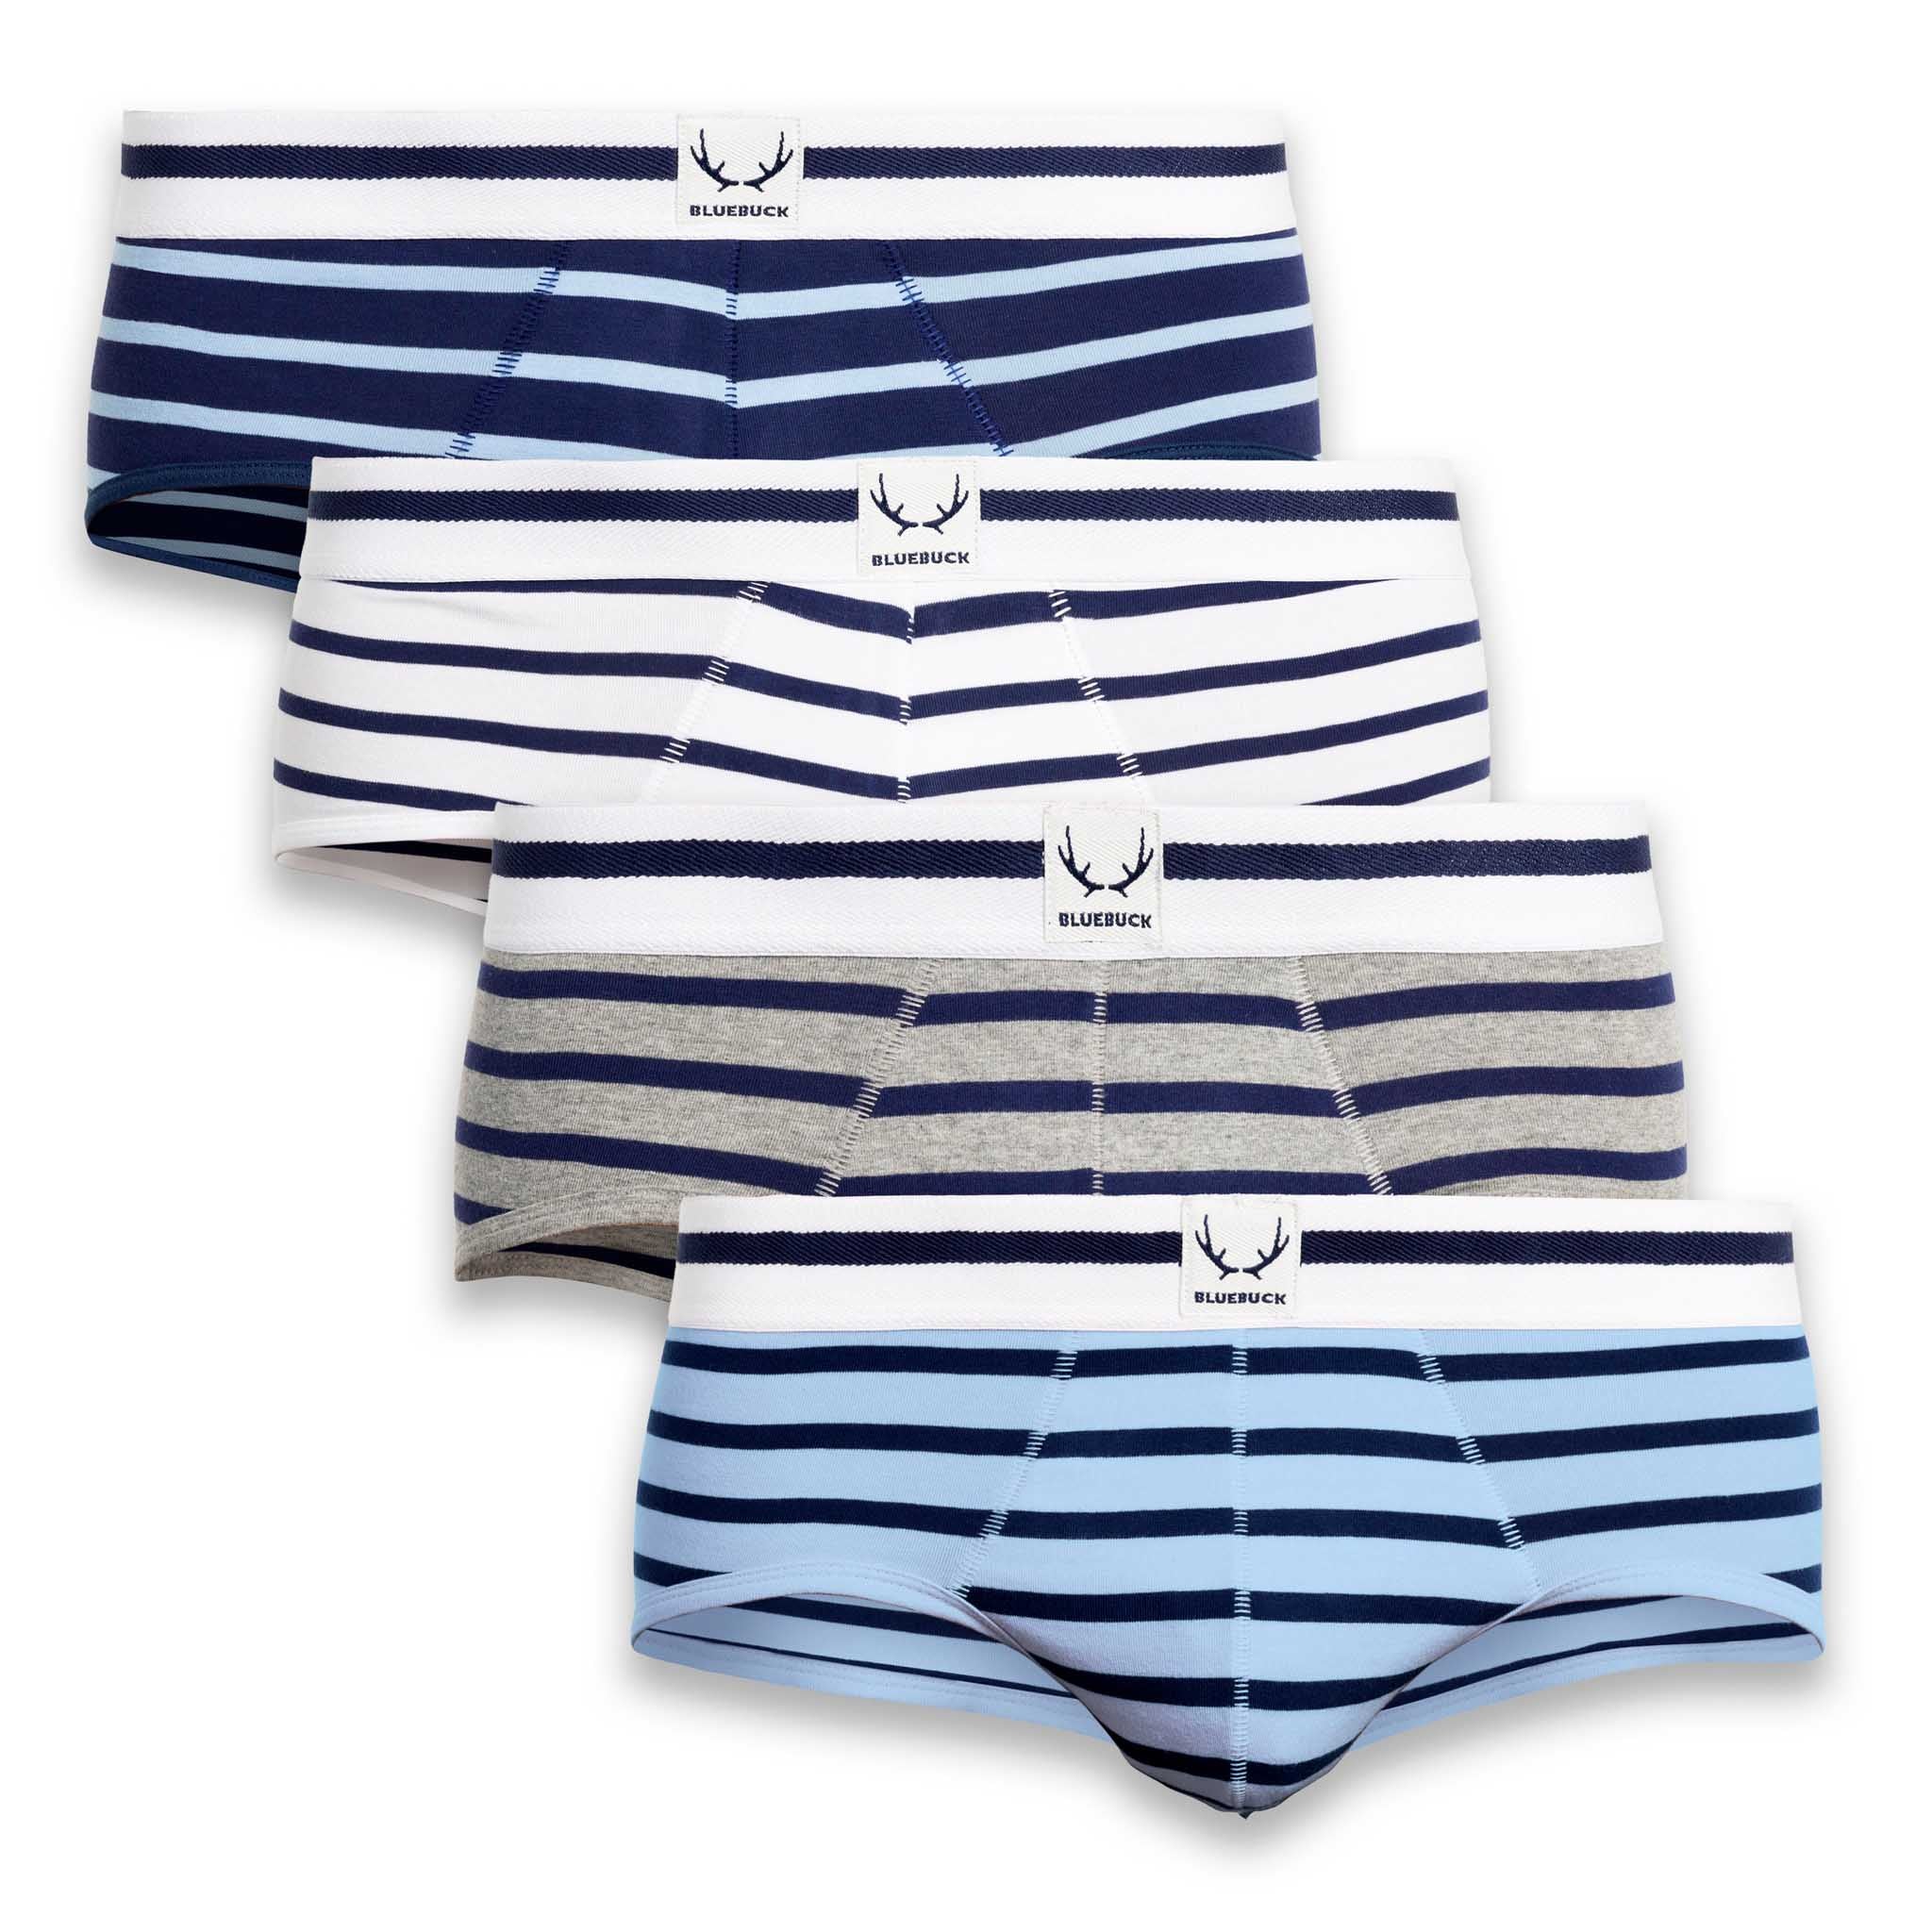 Colorful underwear pack of 4 made of organic cotton from Bluebuck